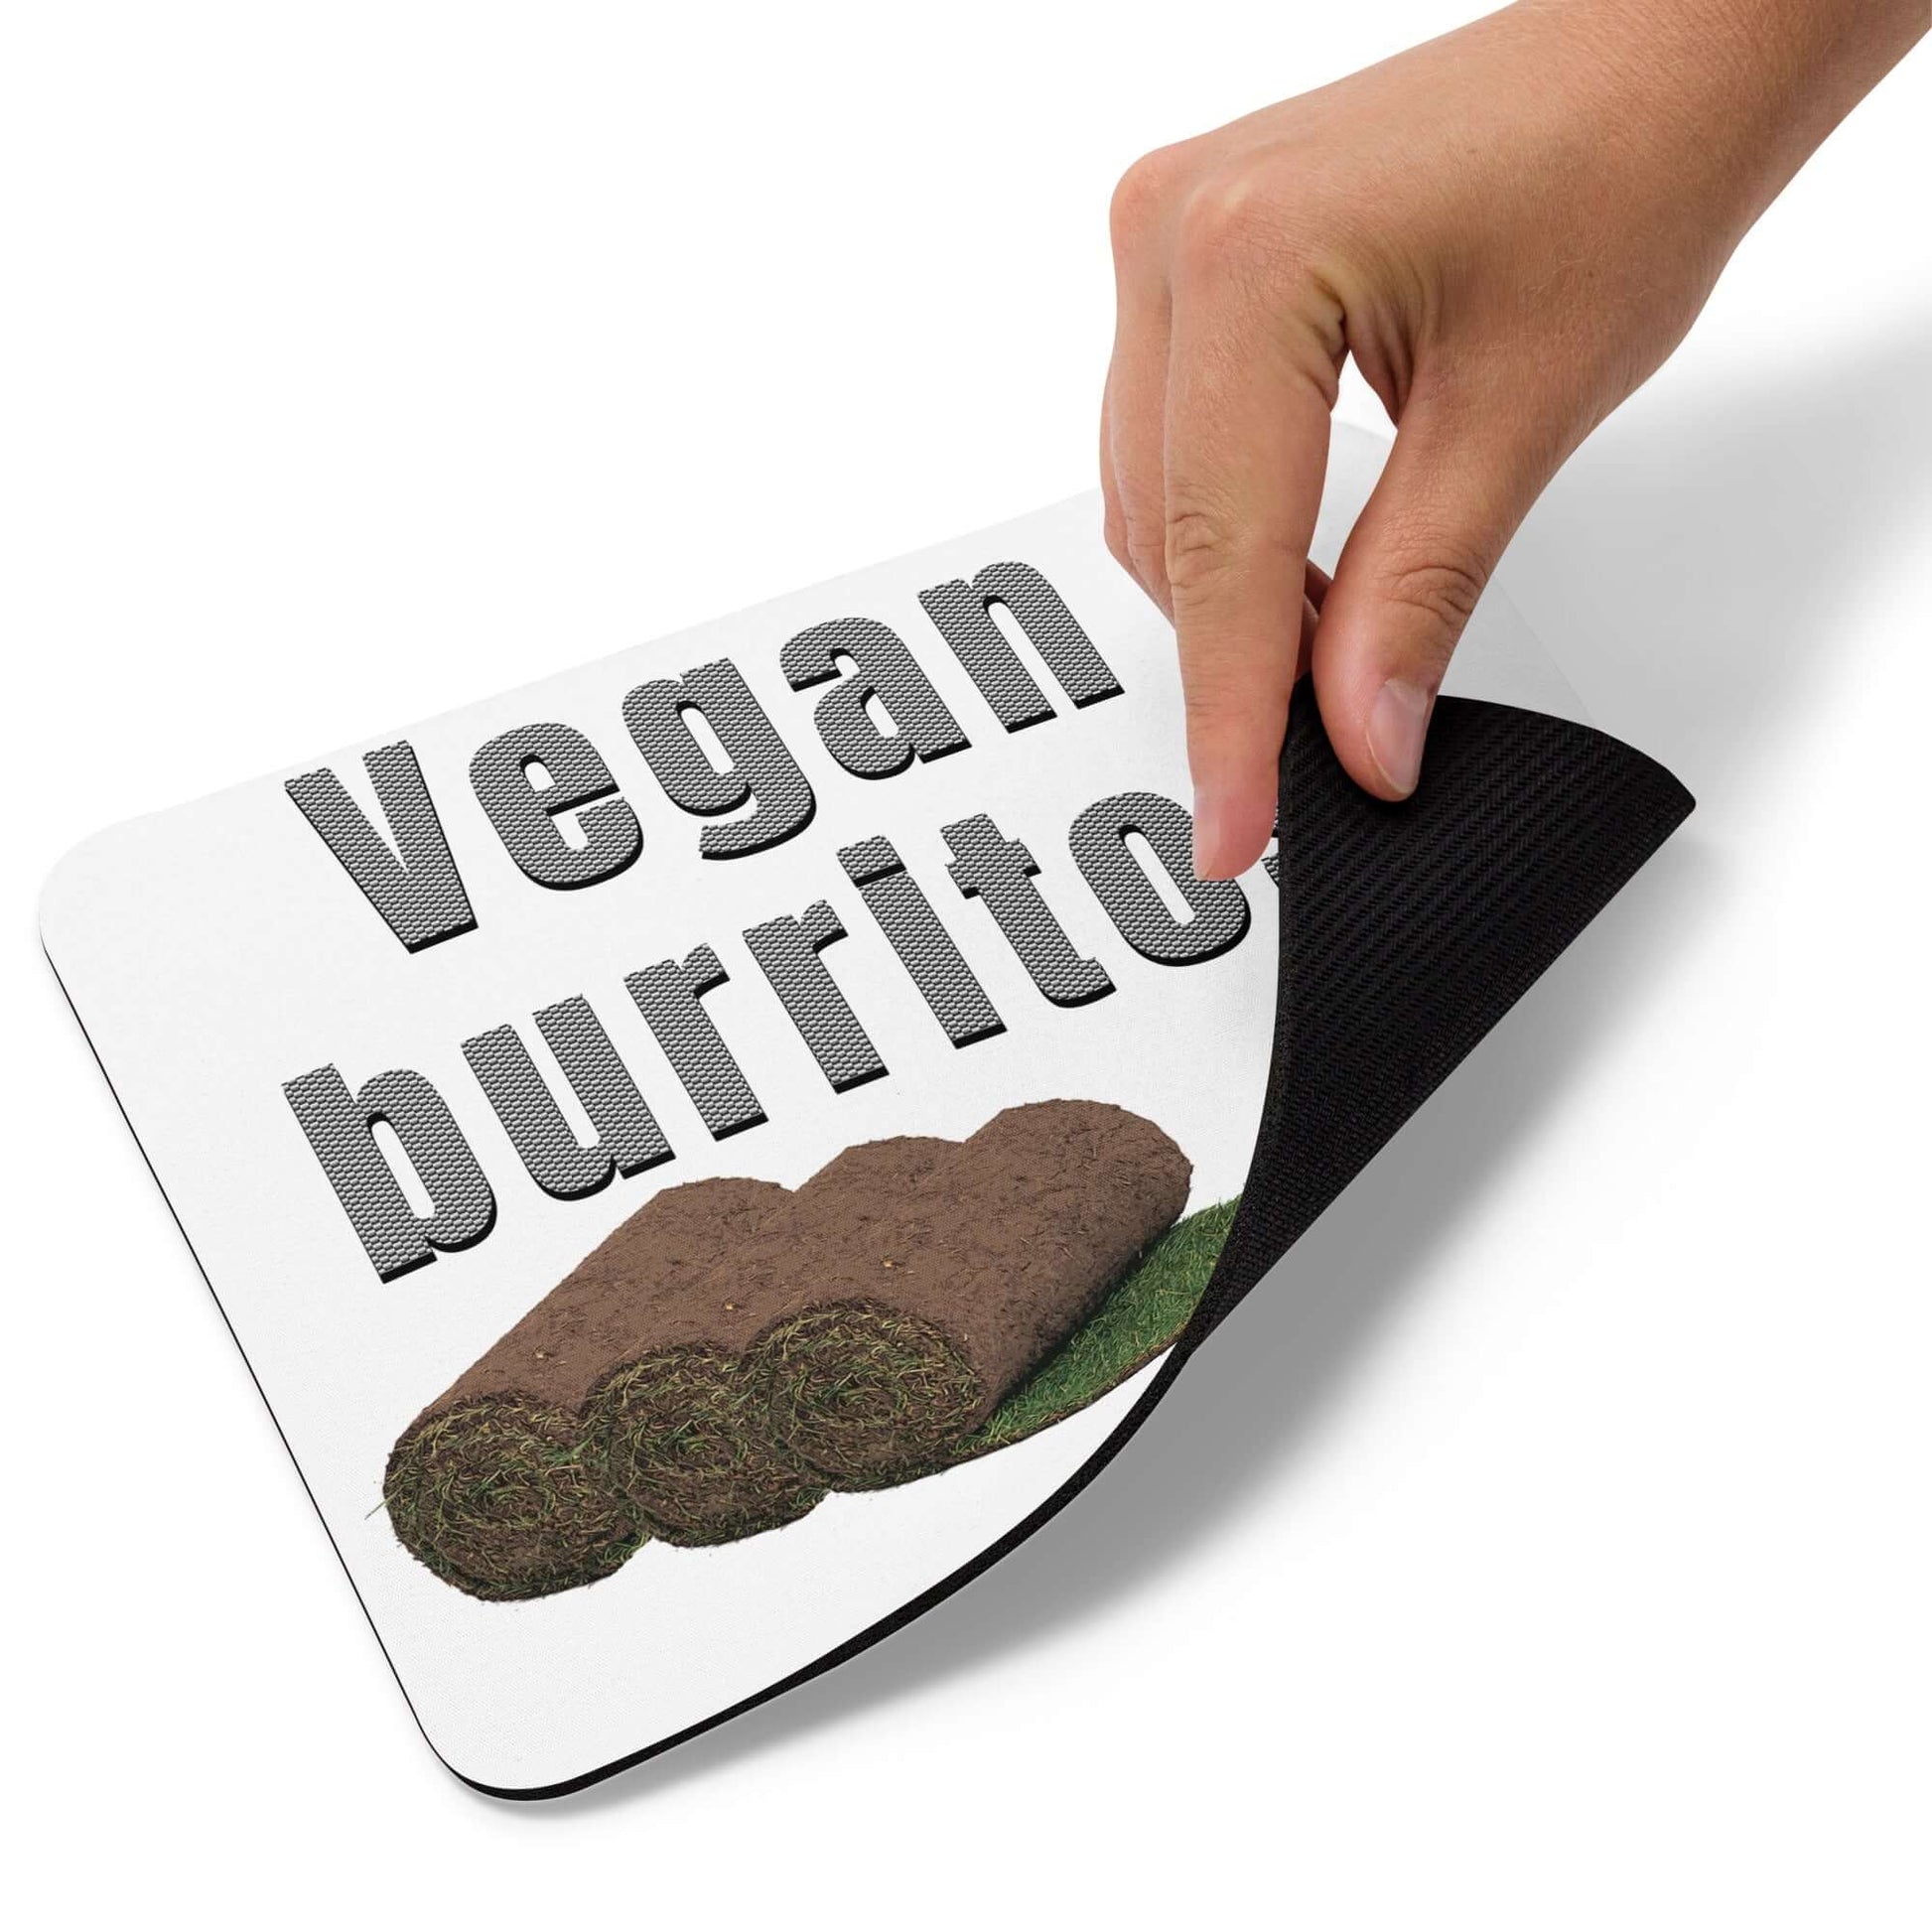 Vegan Burritos - Mouse pad Ancestral Diet Atkins Diet Baconator Barbecue Butchery carnivore Carnivorous Diet Coffee Snob Fishing Free-Range Meat Funny Quotes Game Meat Grass-Fed Meat Grilling High-Fat Diet Humor Hunting keto Ketogenic Low-Carb Diet meat Omnivore Paleo Predator. Meat Eater Protein Protein Shake Red Meat sod Steakhouse vegan White Meat Wordplay